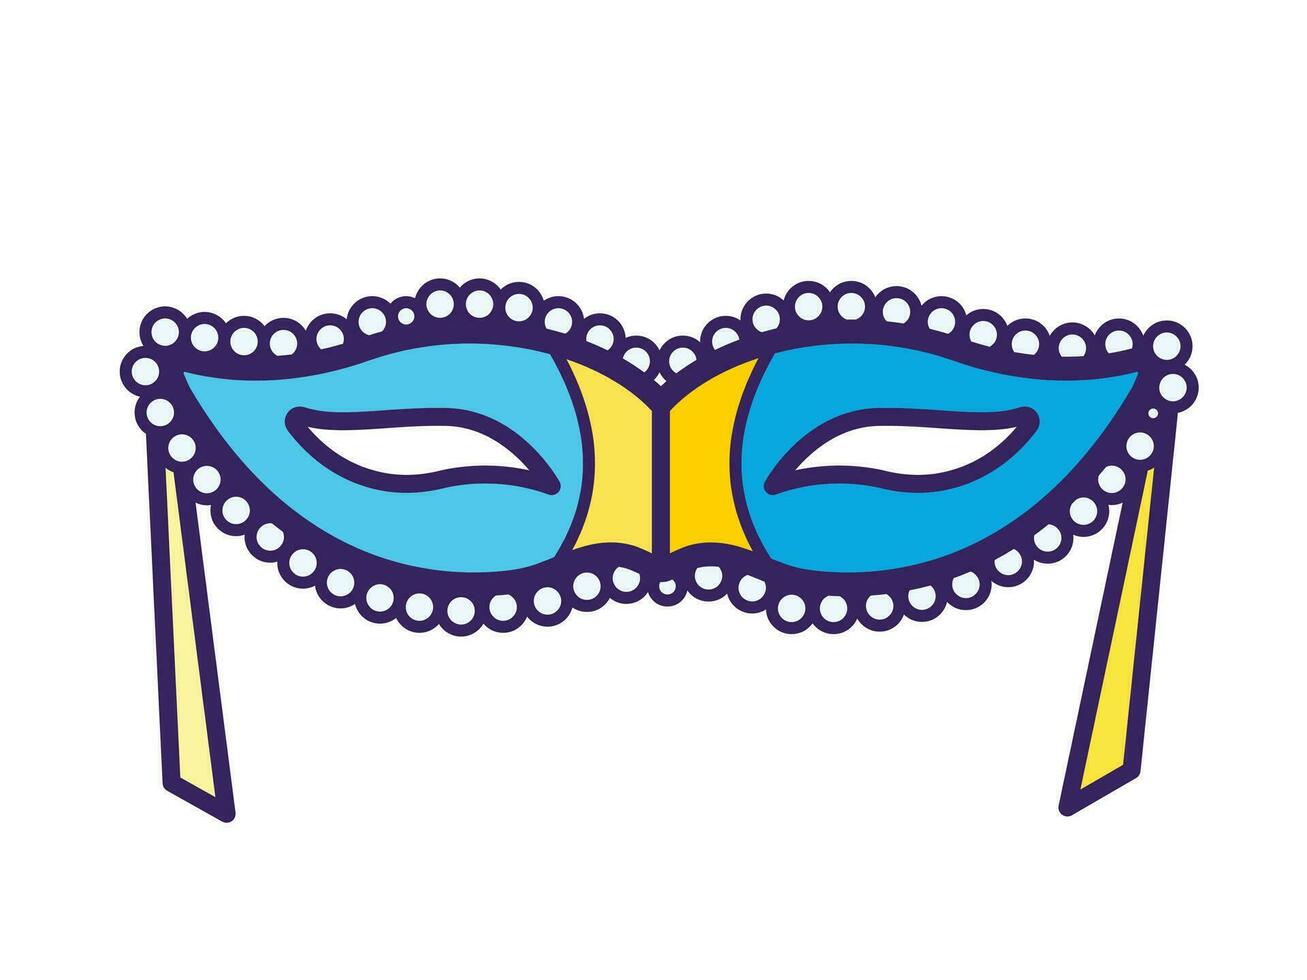 Blue and yellow colored masquerade party eye mask vector icon outlined isolated on white horizontal background. Simple flat minimalist carnaval themed cartoon art styled drawing.